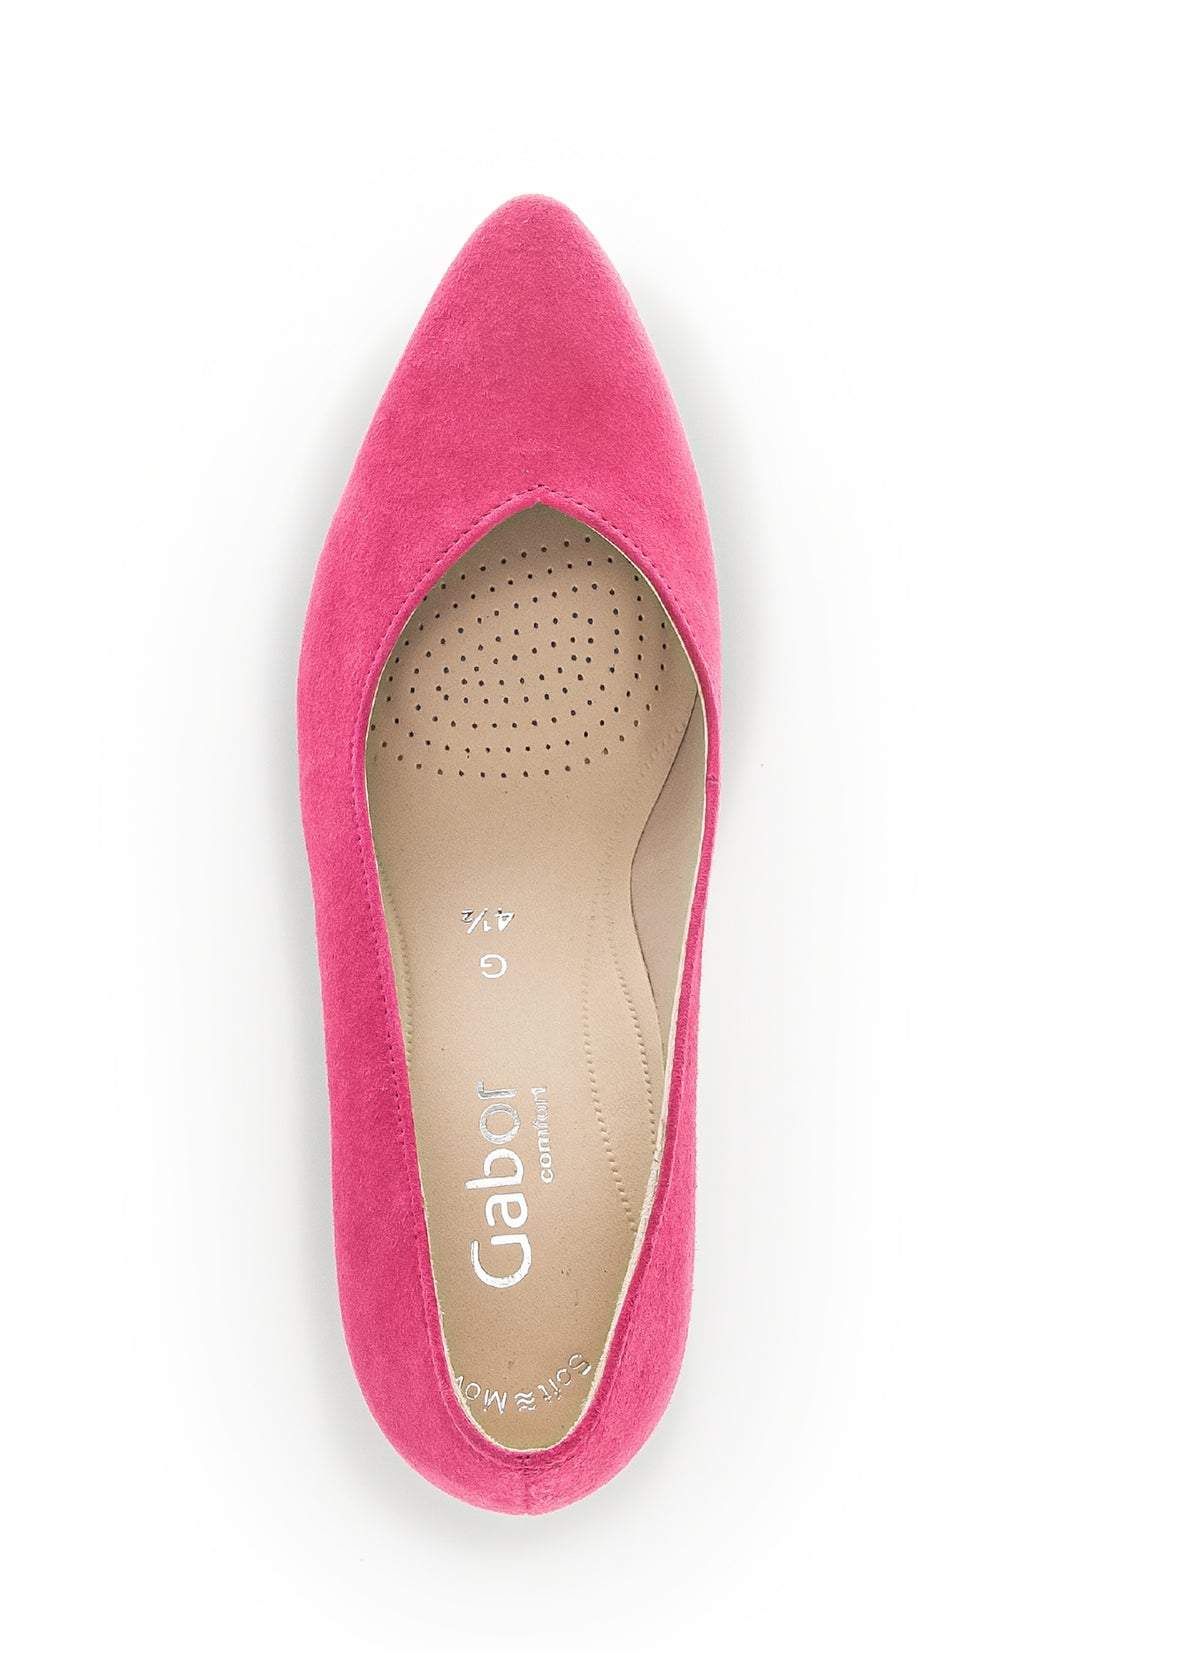 Open-toed shoes with studded shoes - pink